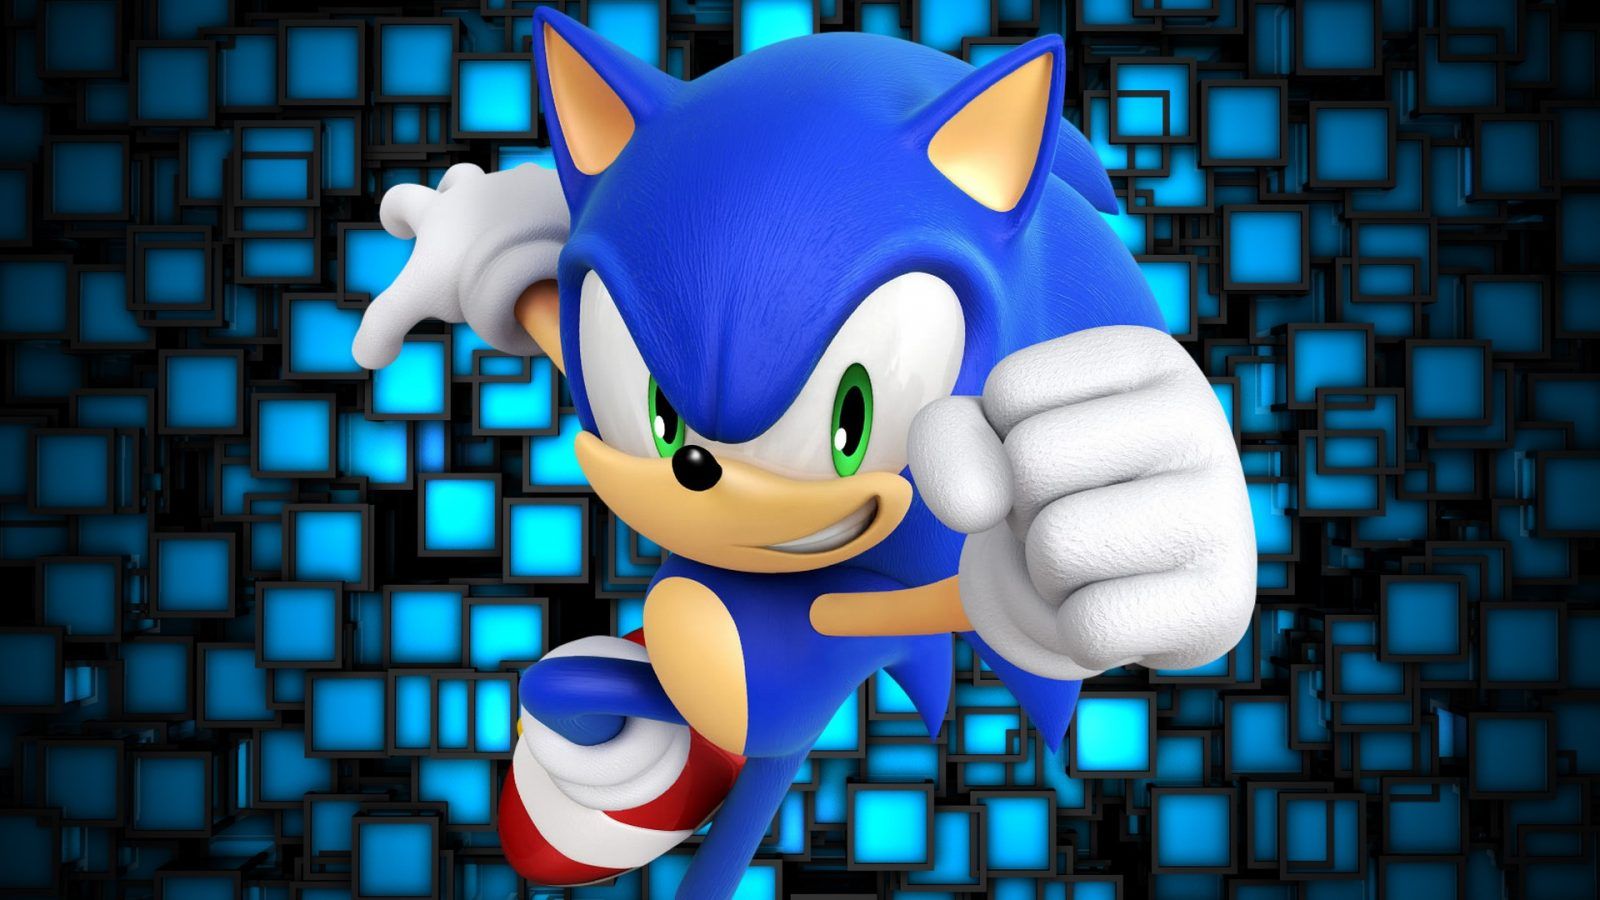 Deadpool Director Is Producing Sonic The Hedgehog Movie For November 2019